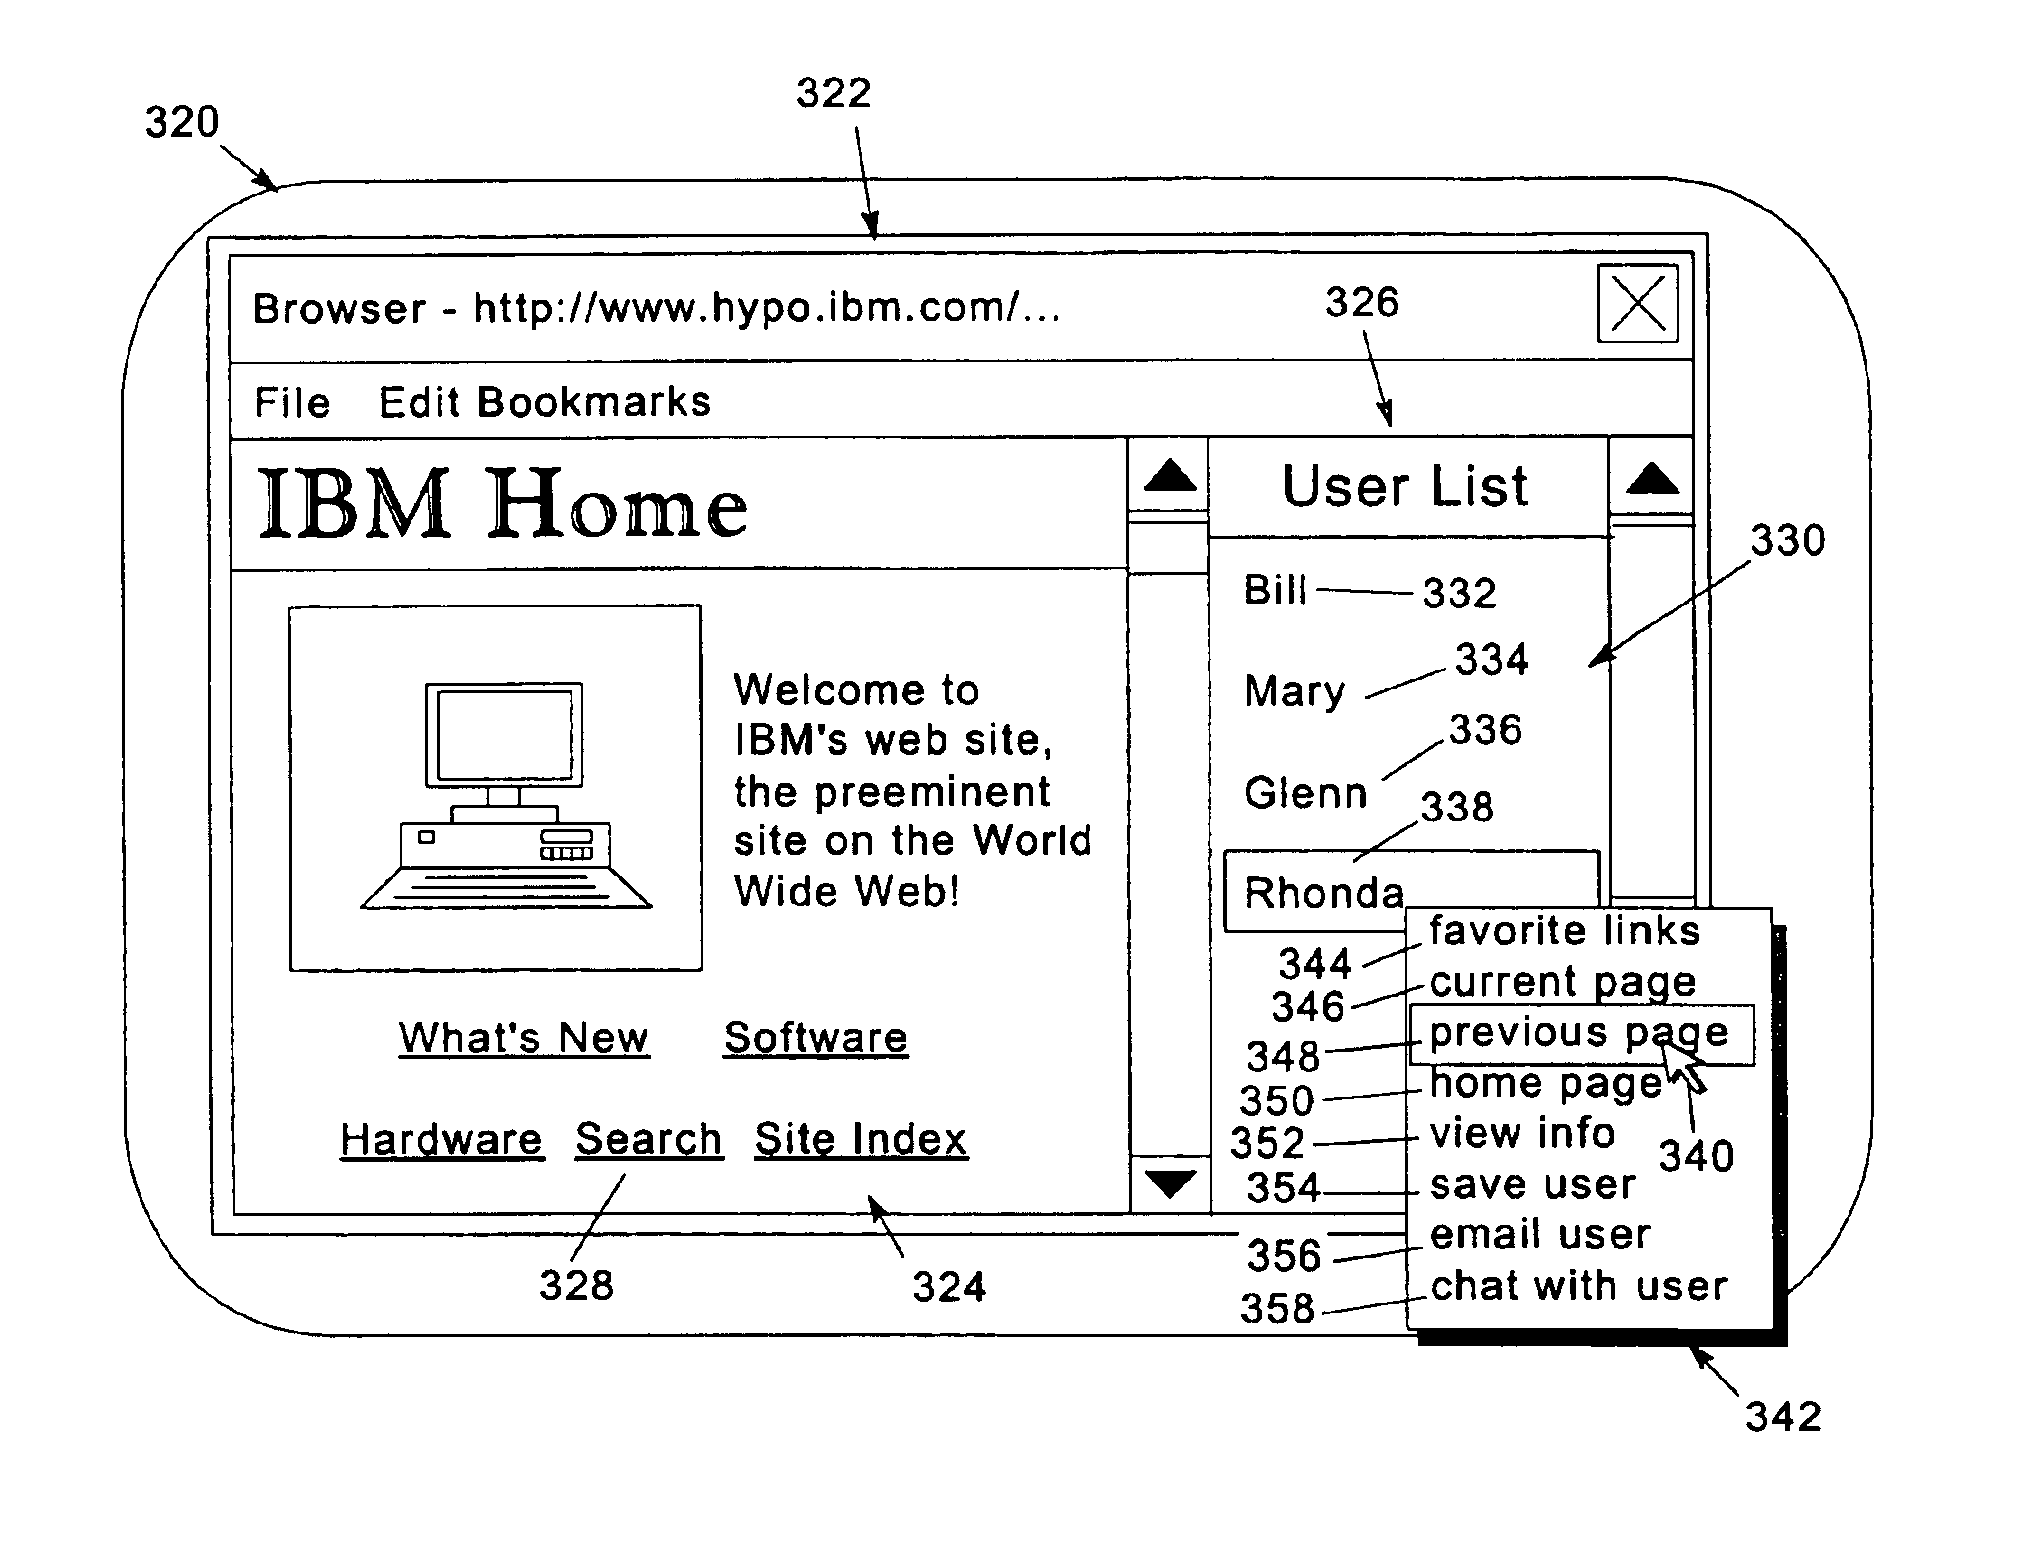 Browser for use in accessing hypertext documents in a multi-user computer environment